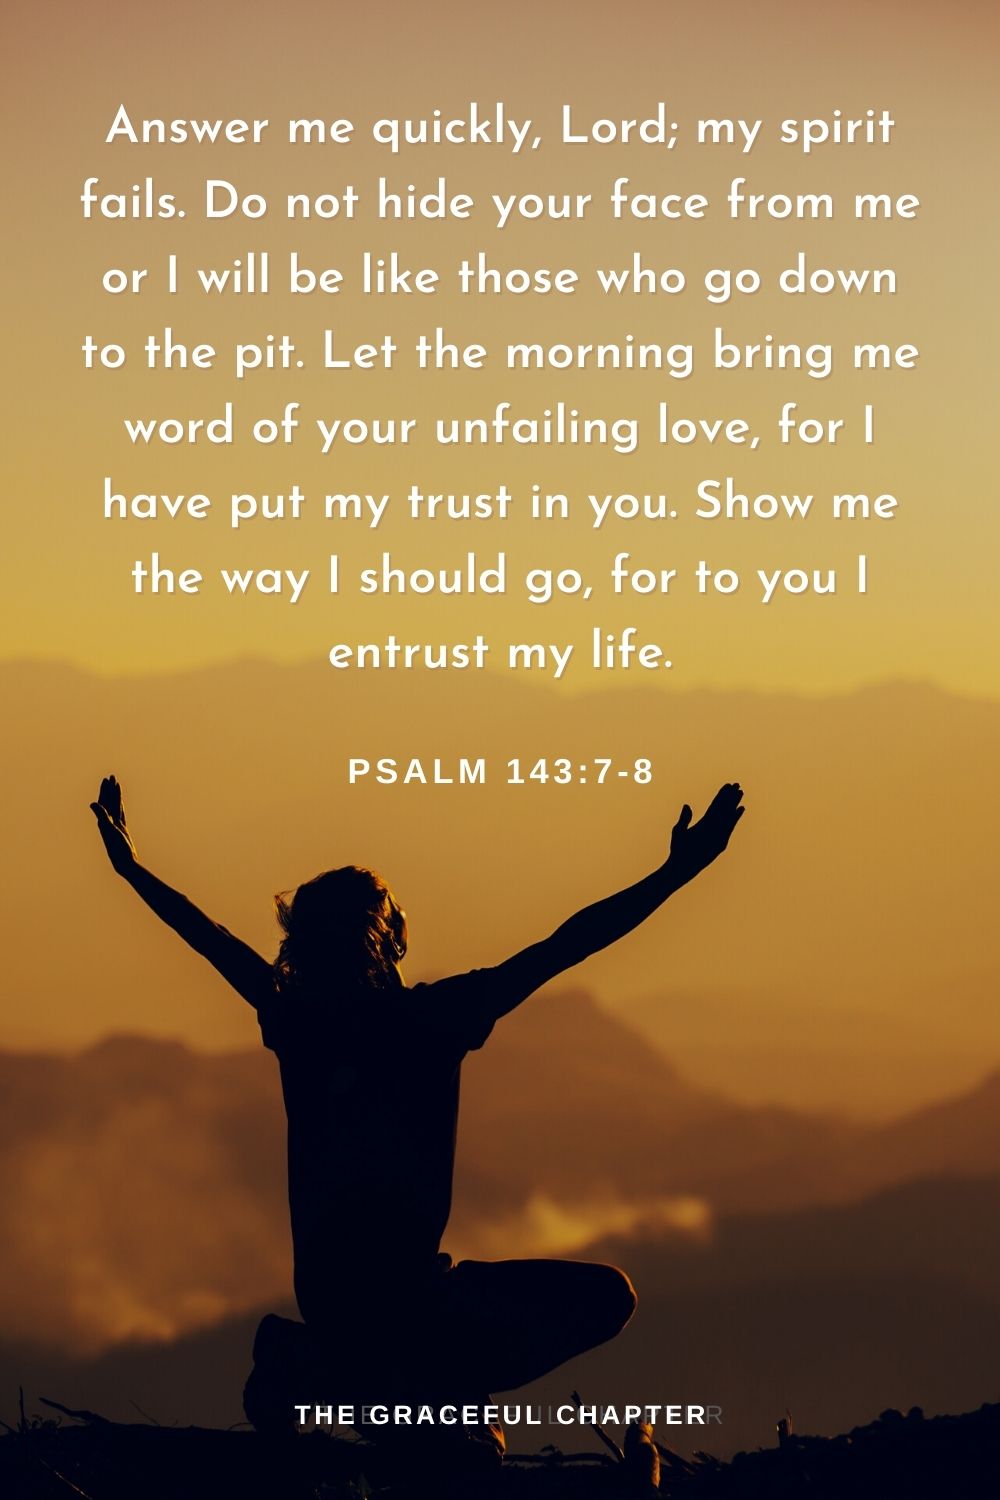 Answer me quickly, Lord; my spirit fails. Do not hide your face from me or I will be like those who go down to the pit. Let the morning bring me word of your unfailing love, for I have put my trust in you. Show me the way I should go, for to you I entrust my life.